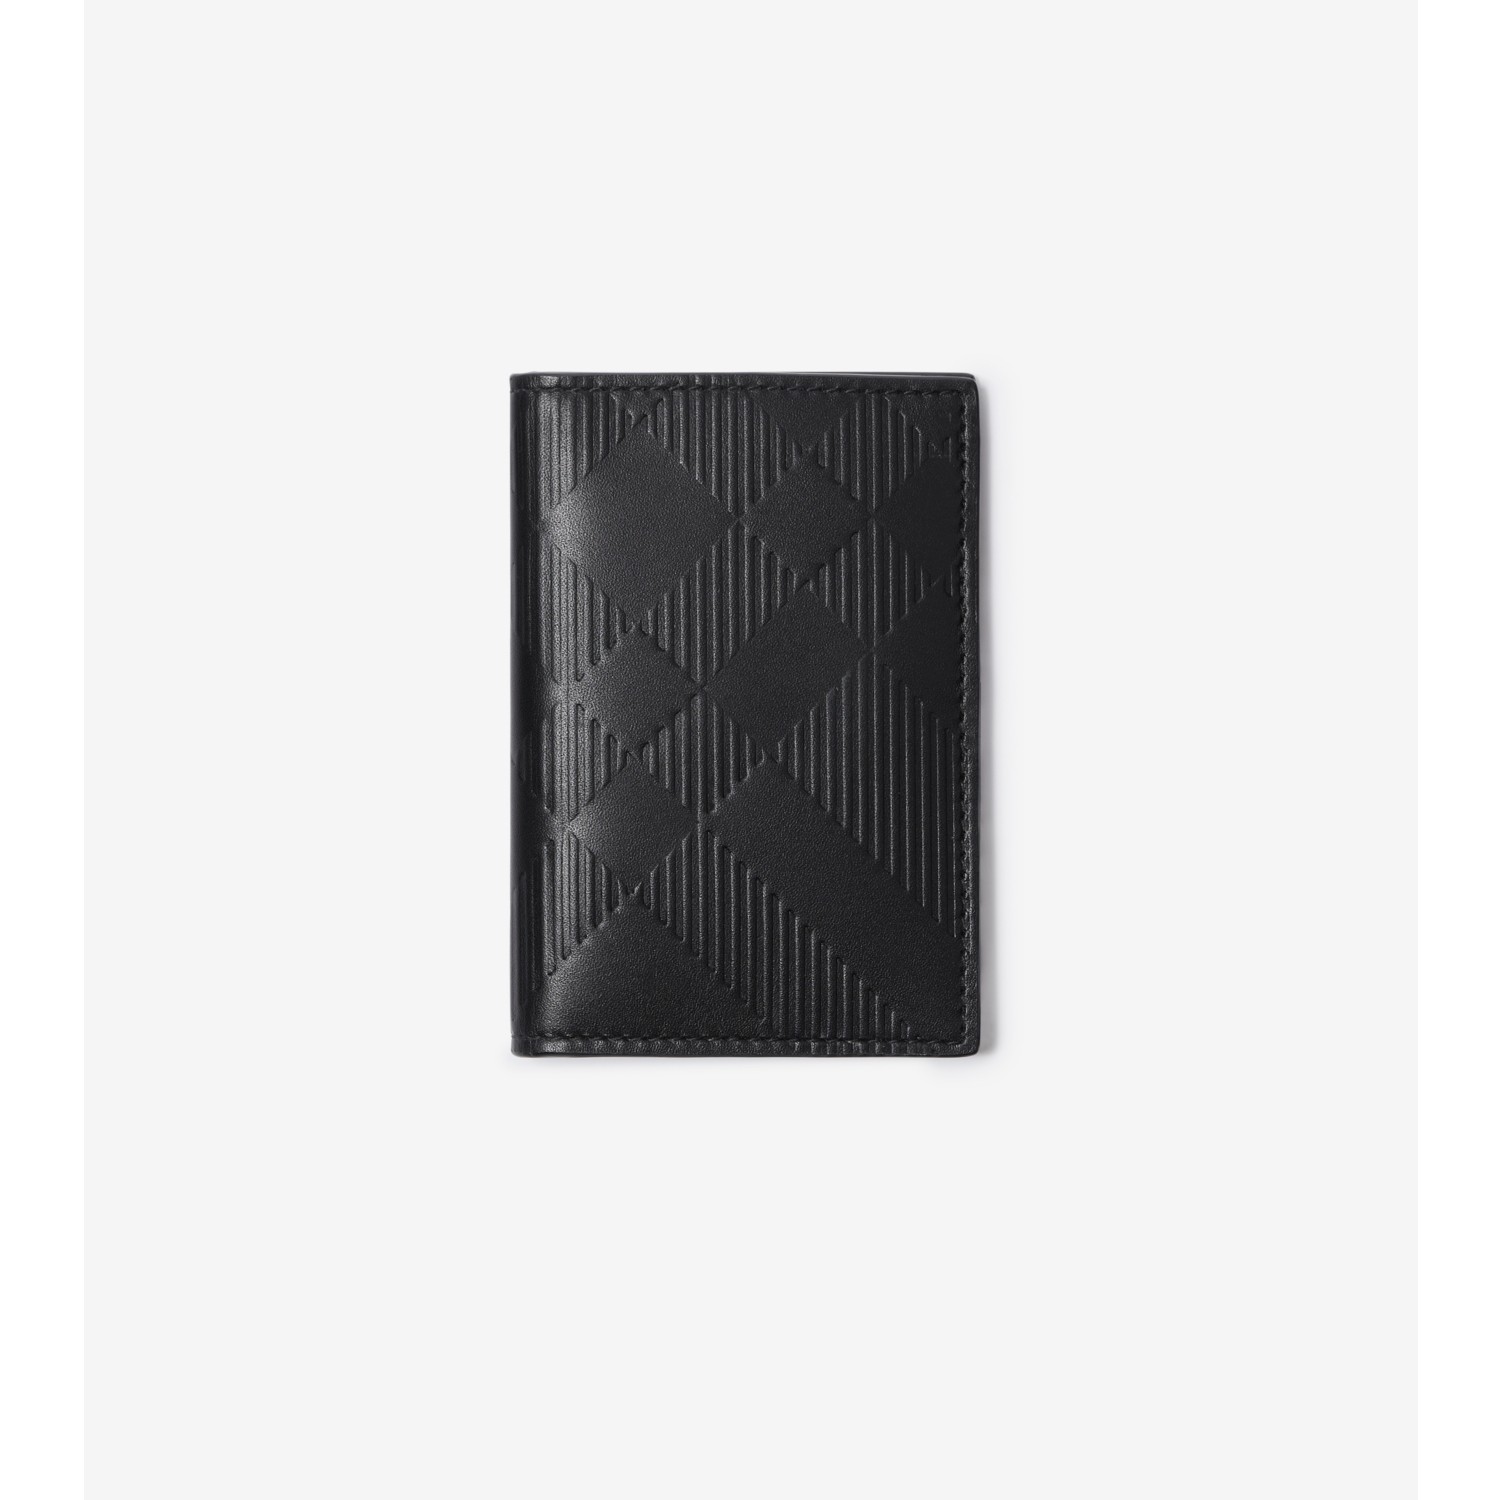 BURBERRY Embossed check leather card case